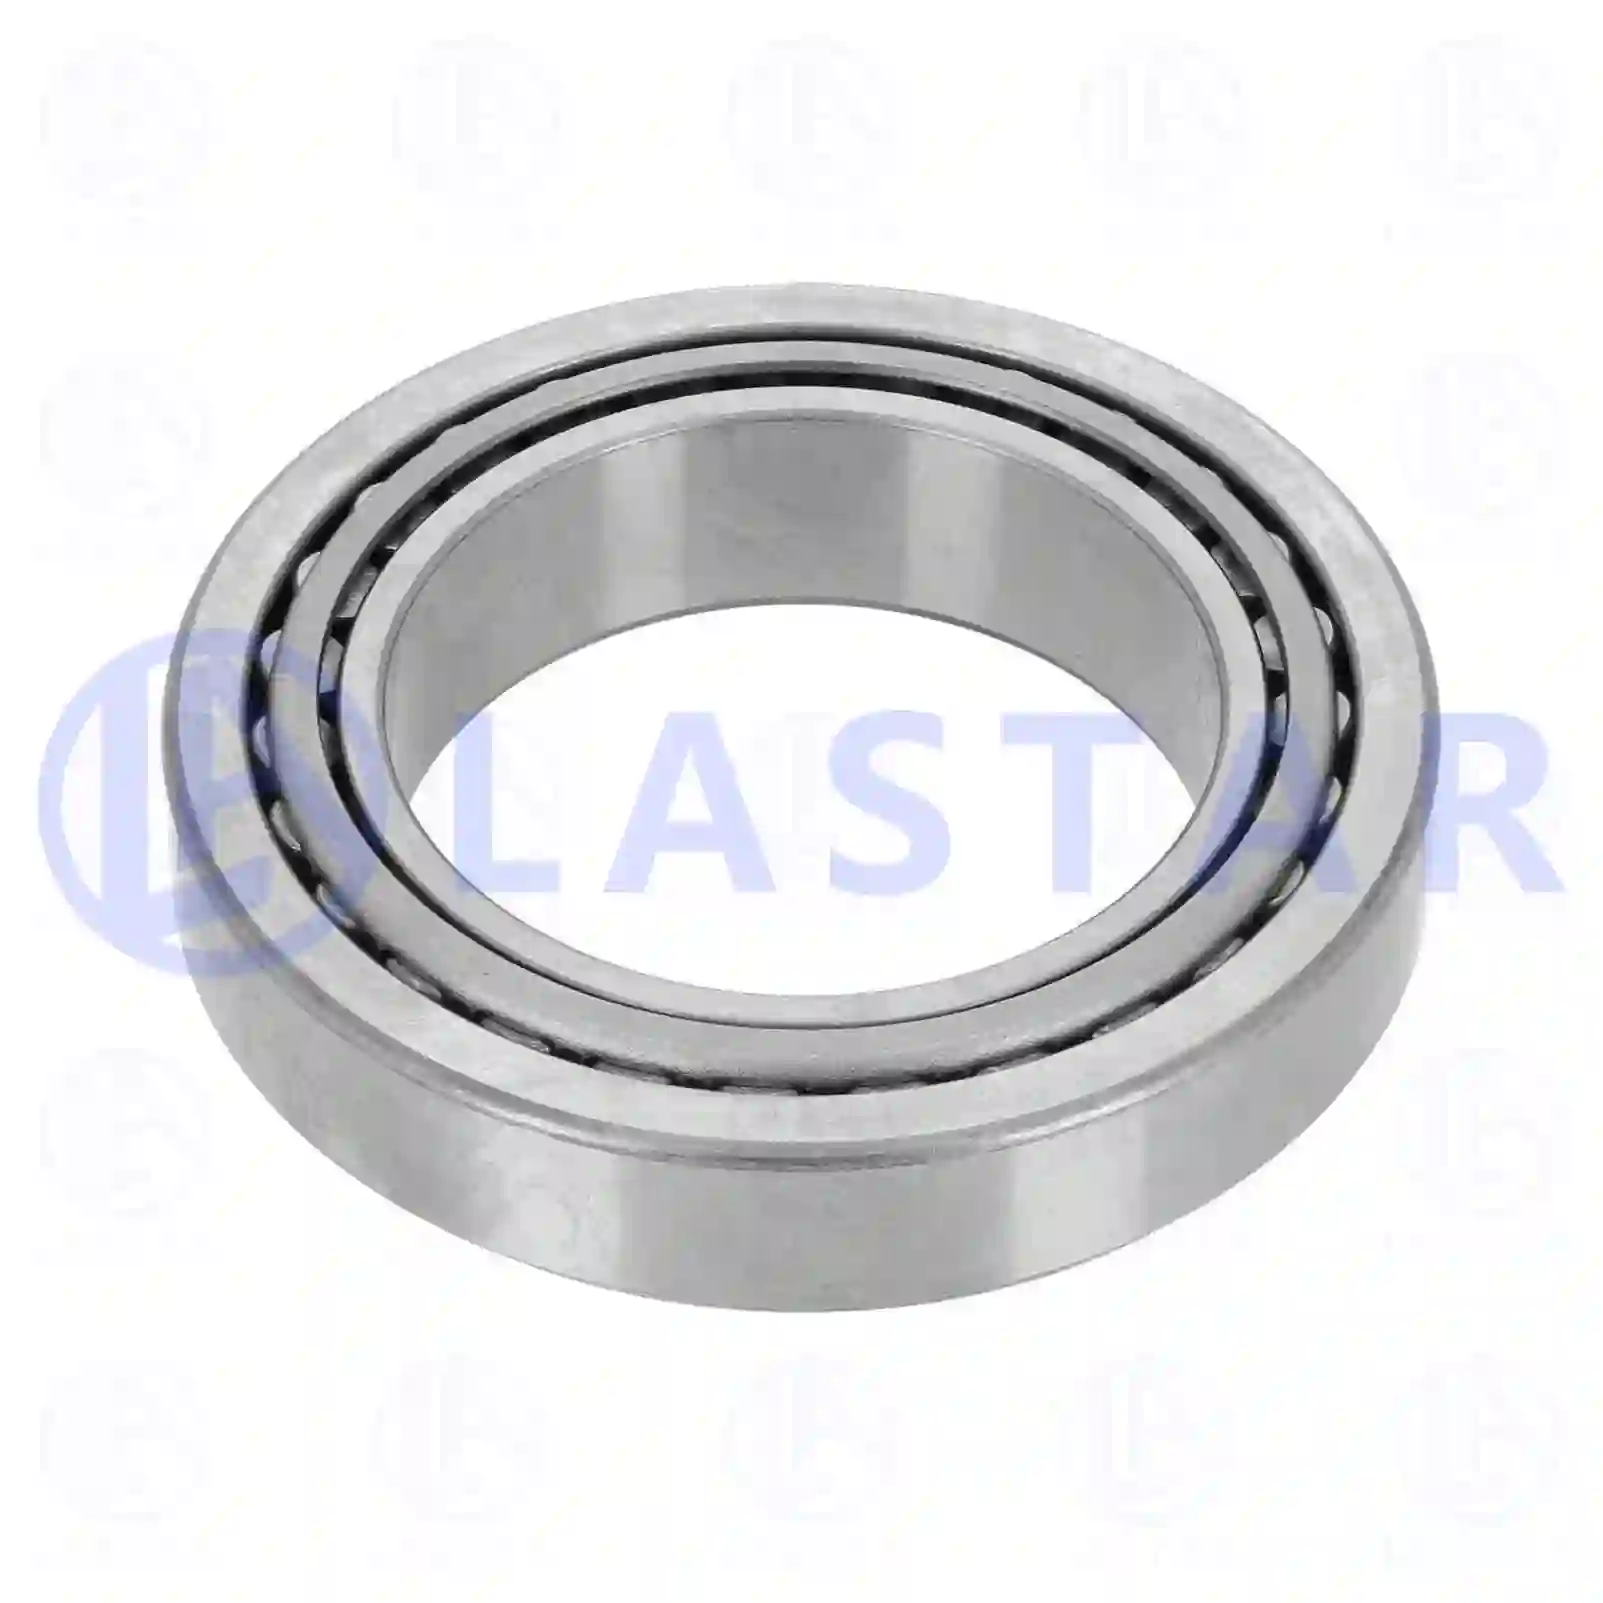 Tapered roller bearing, 77730390, 0059811505, 005092803, 60115335, 01125572, 5010443903, 60115335, 06324800060, 06324801200, 06324811200, 06324890060, 06324890091, 81934200150, 87523001201, 000720032017, 0059811405, 0059811505, 0059811605, 0159810005, 0159810805, 0179818205, 0023336246, 5010443903, 7400184623, 1524964, 184623, 2V5501283, ZG02982-0008 ||  77730390 Lastar Spare Part | Truck Spare Parts, Auotomotive Spare Parts Tapered roller bearing, 77730390, 0059811505, 005092803, 60115335, 01125572, 5010443903, 60115335, 06324800060, 06324801200, 06324811200, 06324890060, 06324890091, 81934200150, 87523001201, 000720032017, 0059811405, 0059811505, 0059811605, 0159810005, 0159810805, 0179818205, 0023336246, 5010443903, 7400184623, 1524964, 184623, 2V5501283, ZG02982-0008 ||  77730390 Lastar Spare Part | Truck Spare Parts, Auotomotive Spare Parts